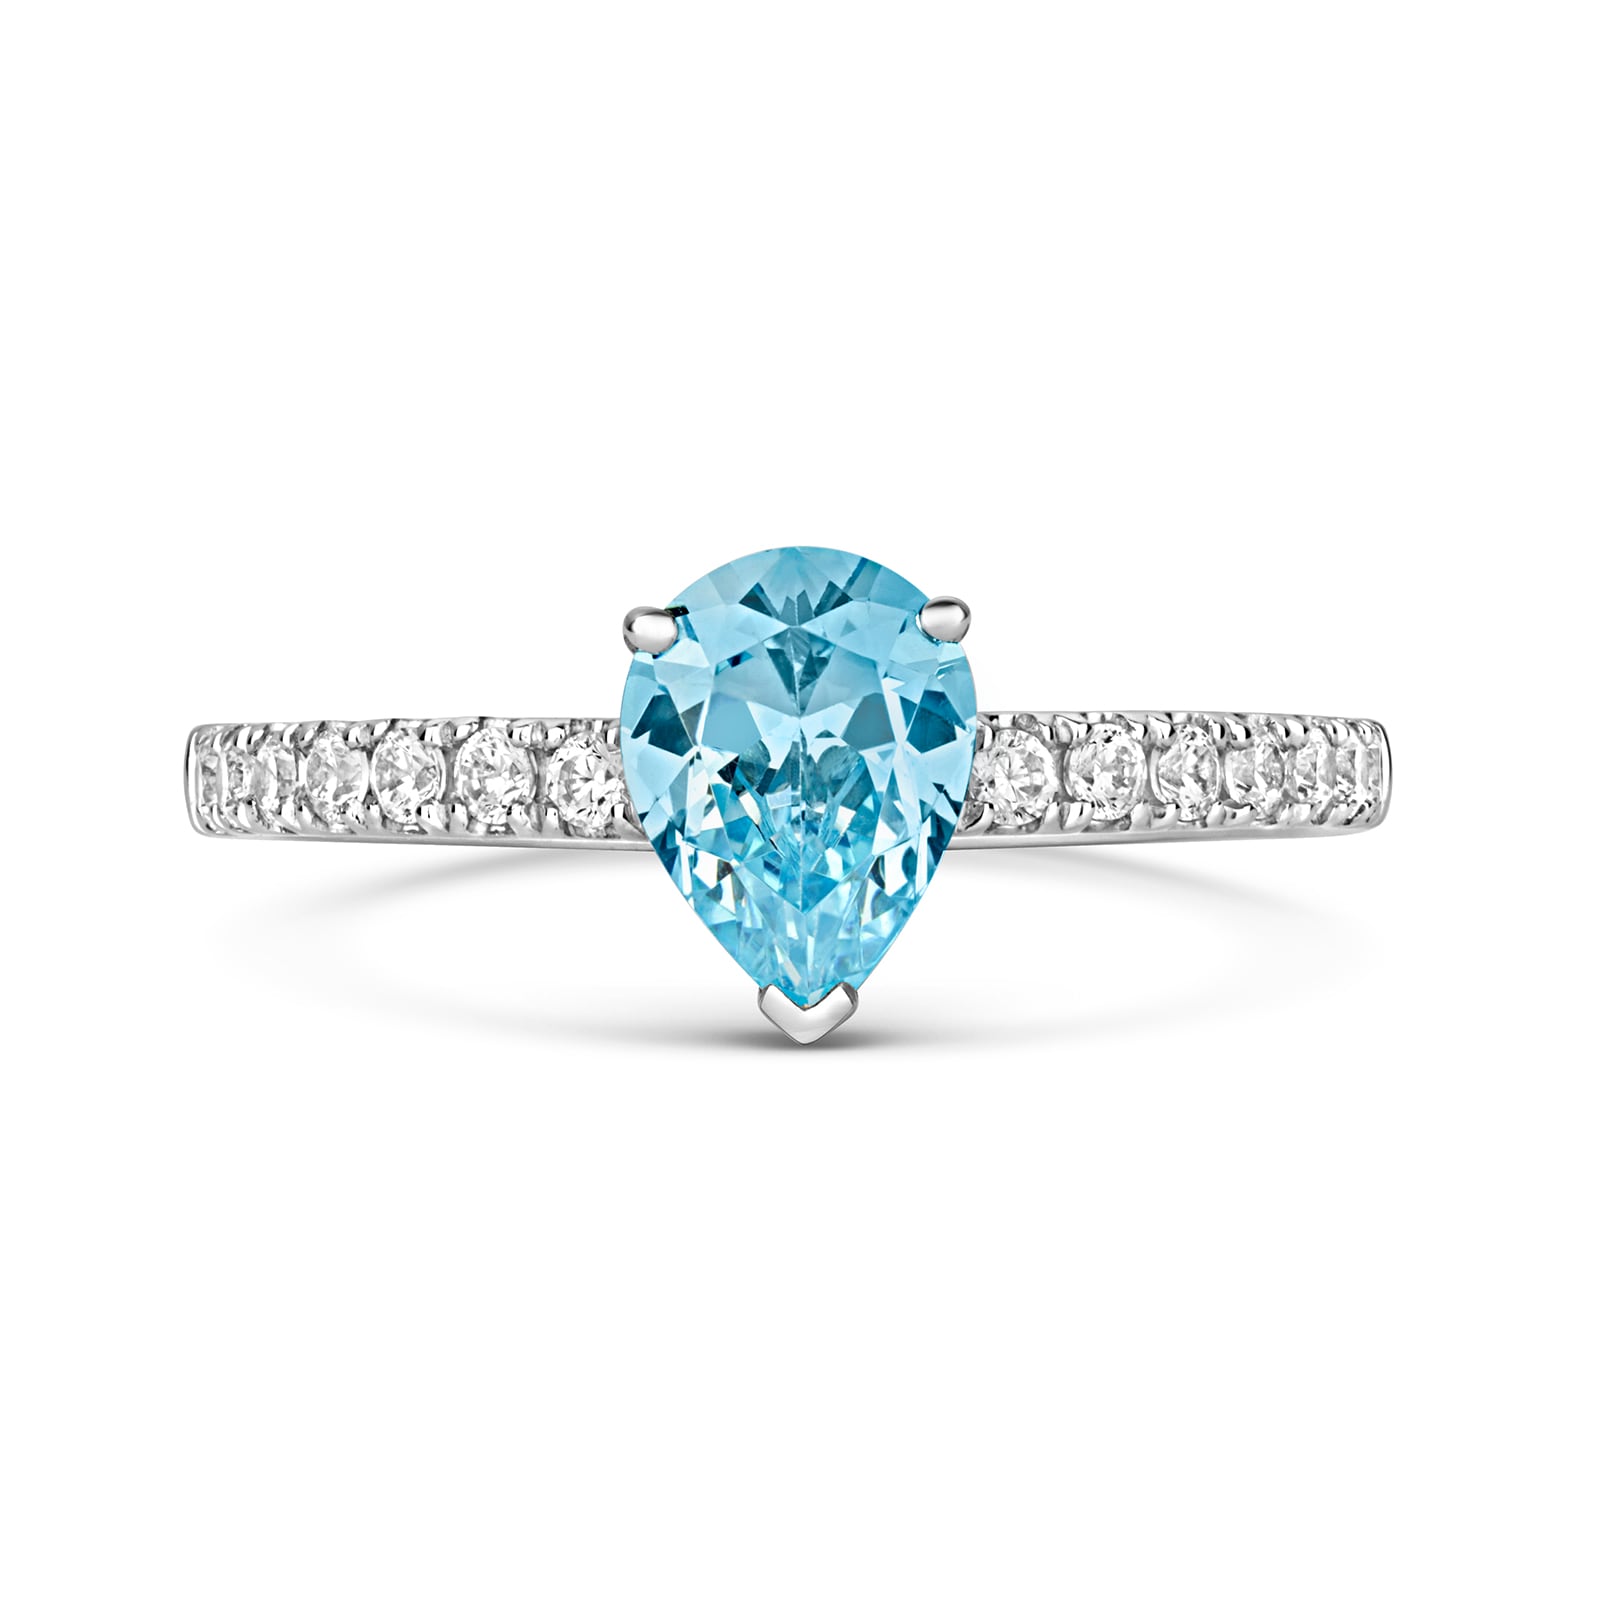 Shop Sterns Colour Gemstone Engagement Rings Online In S.A | Bash